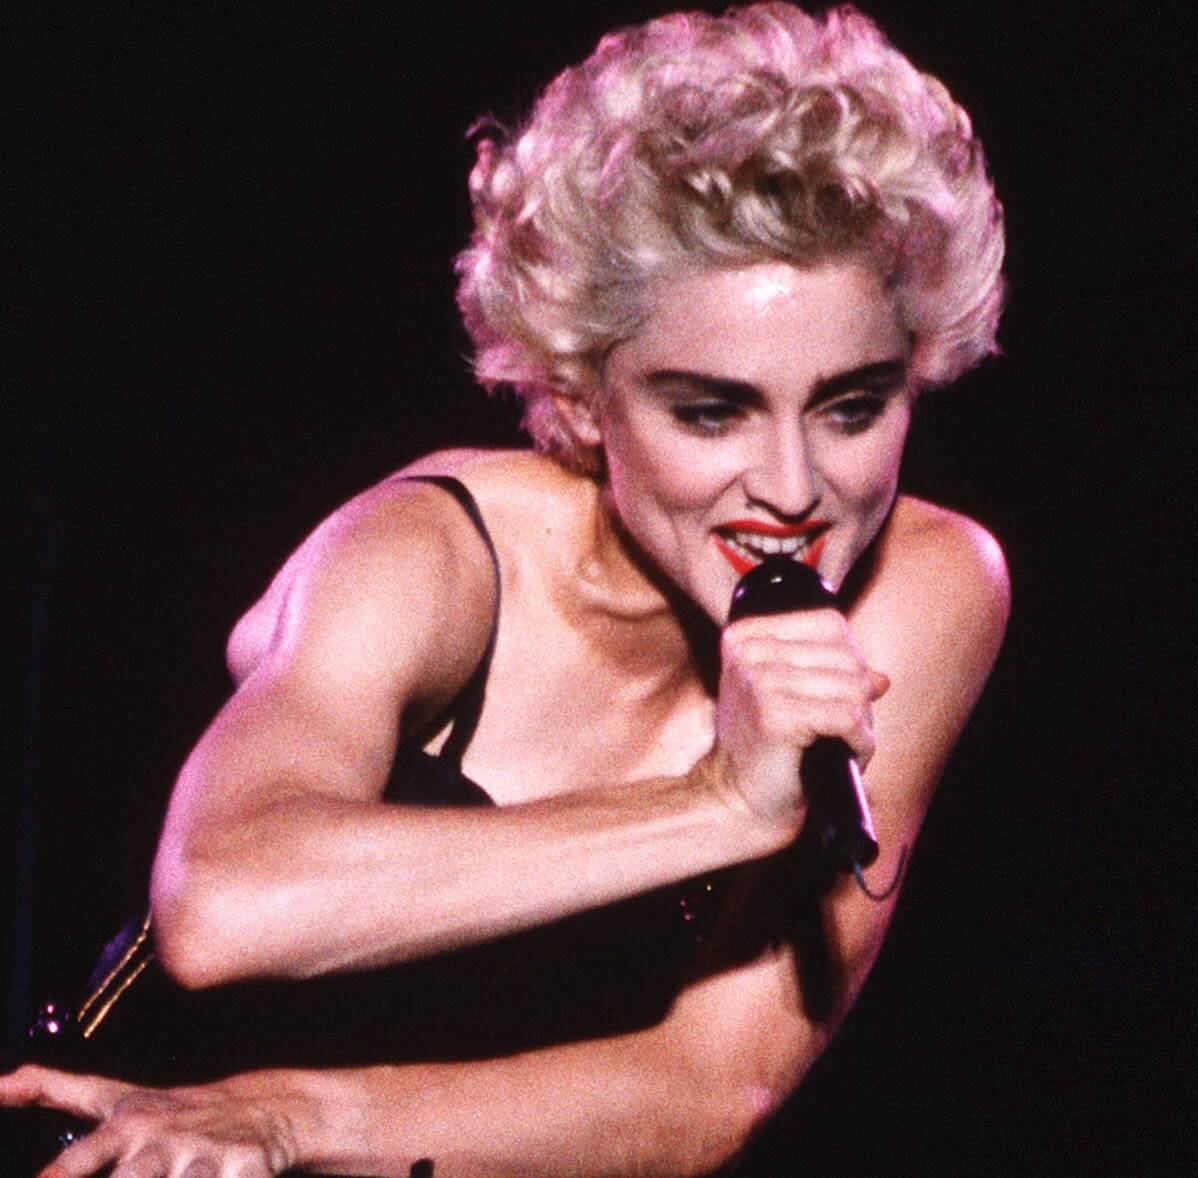 "Holiday" singer Madonna with a microphone